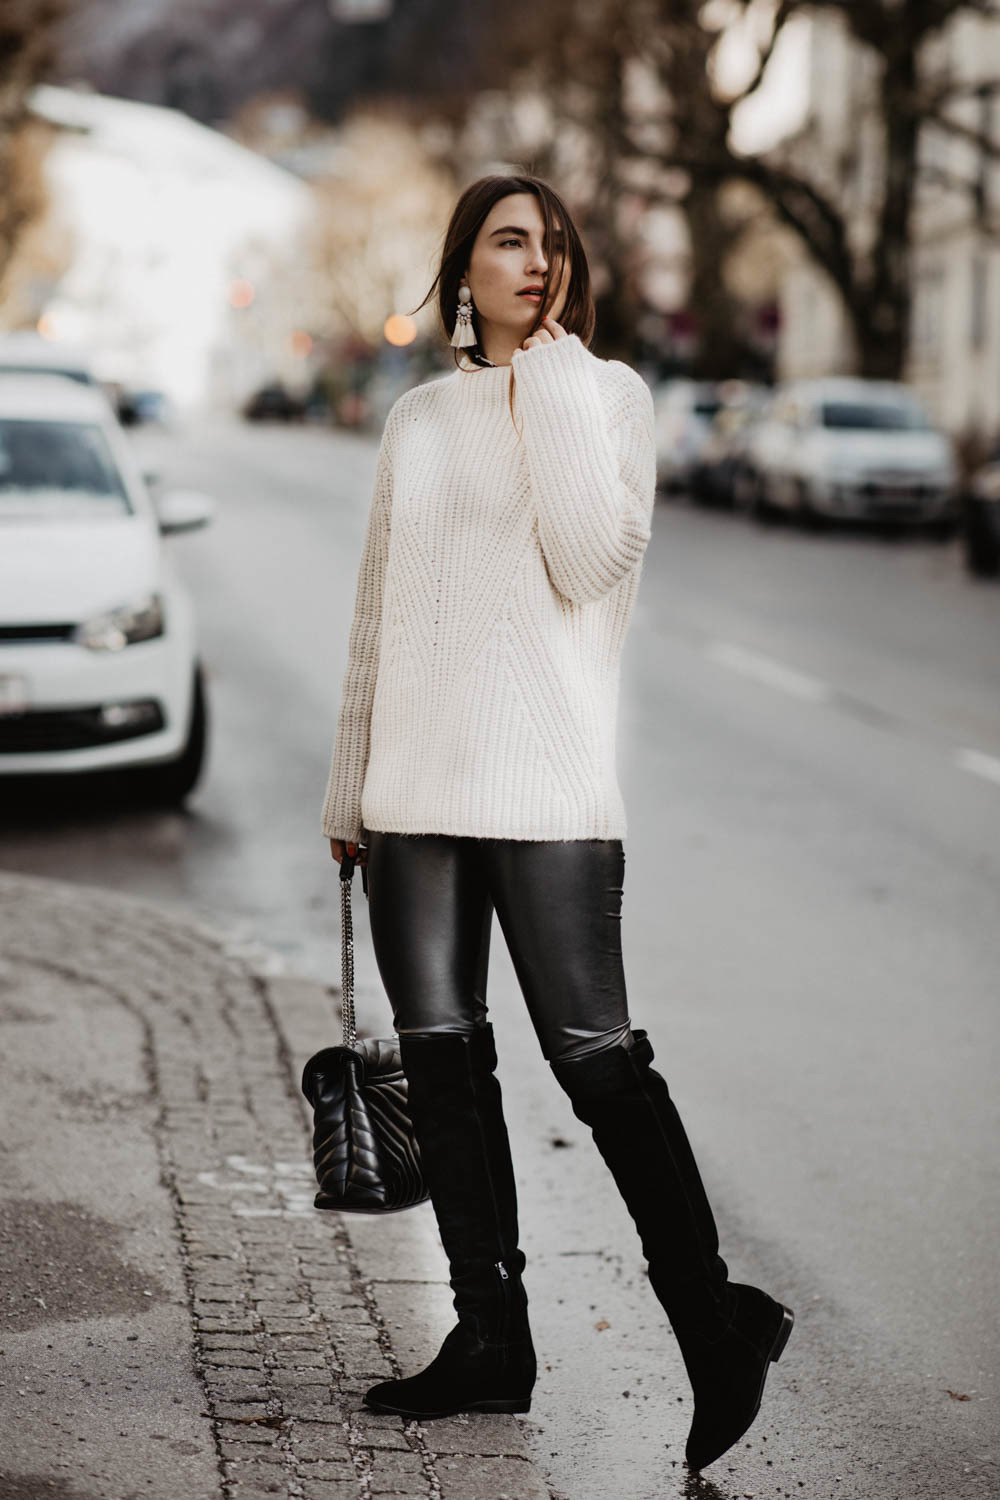 Women's White Cable Sweater, Black Leather Leggings, Black Suede Over The  Knee Boots, Black Quilted Leather Crossbody Bag